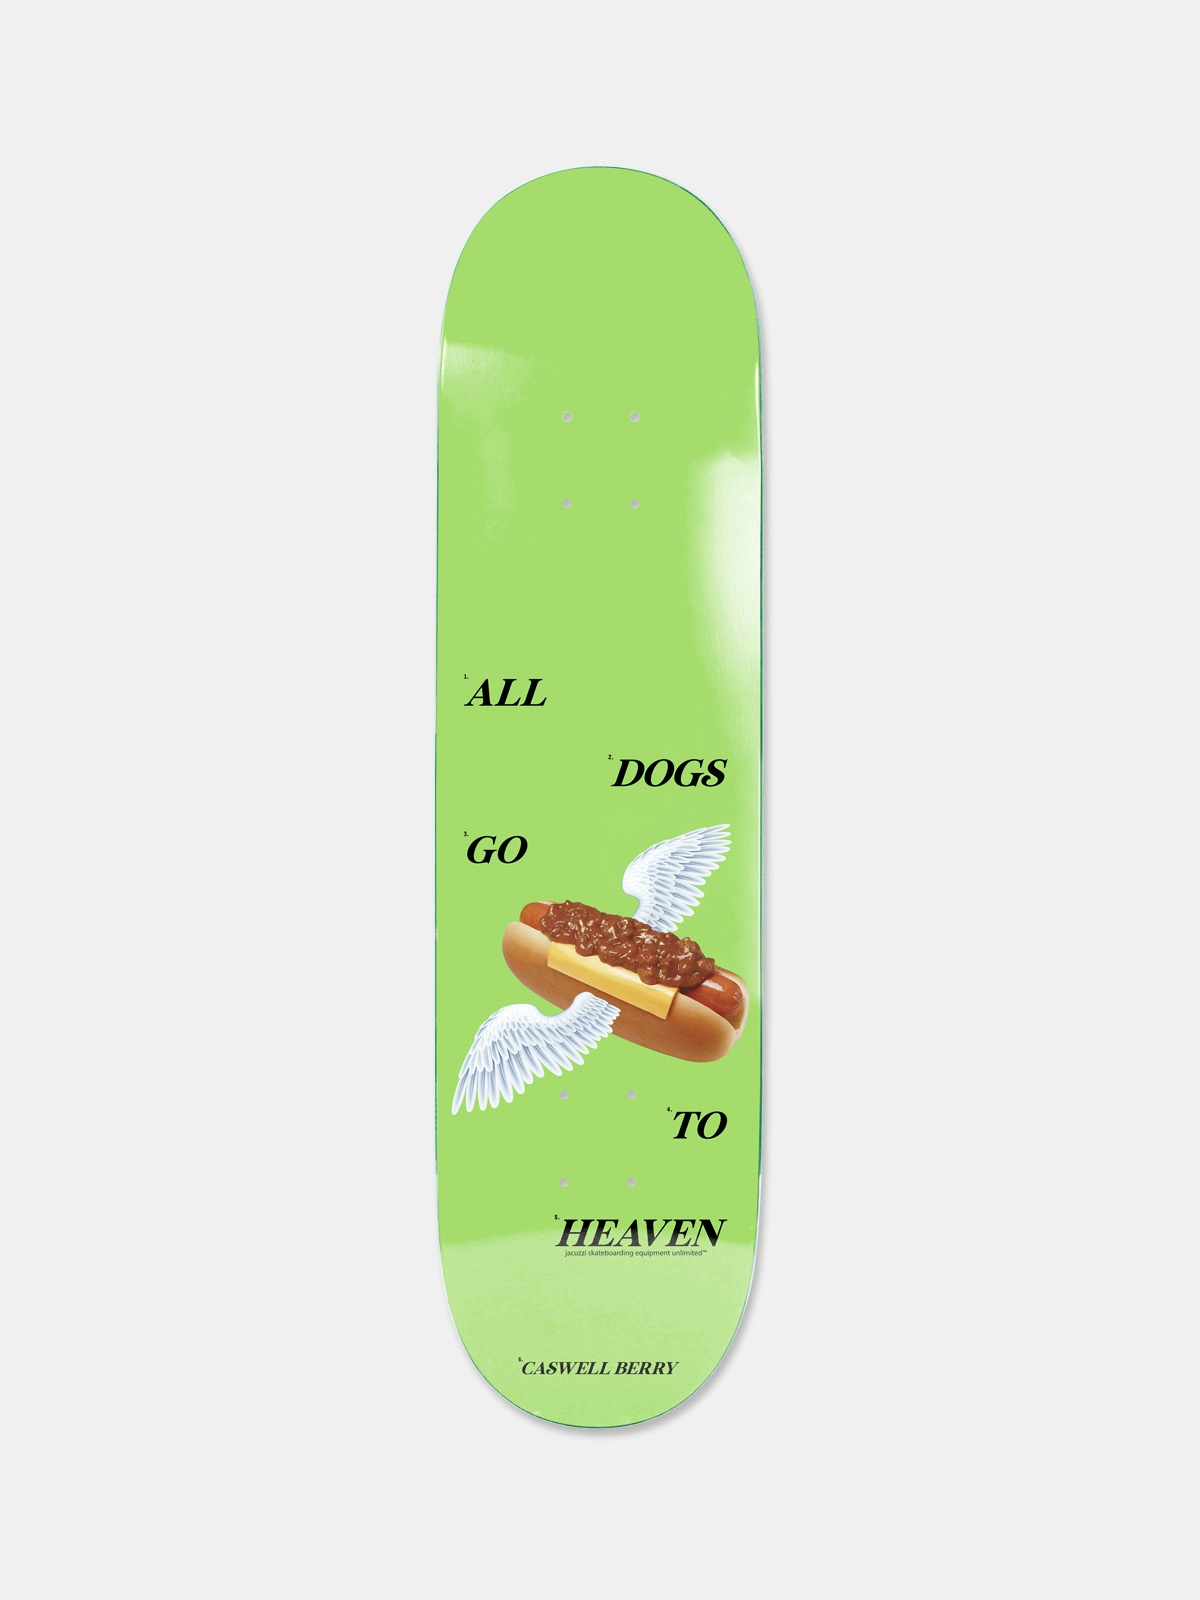 Jacuzzi Unlimited Caswell Berry Hot Dog Heaven - Ex7 Skateboard Deck 8.25" Multicolor 2